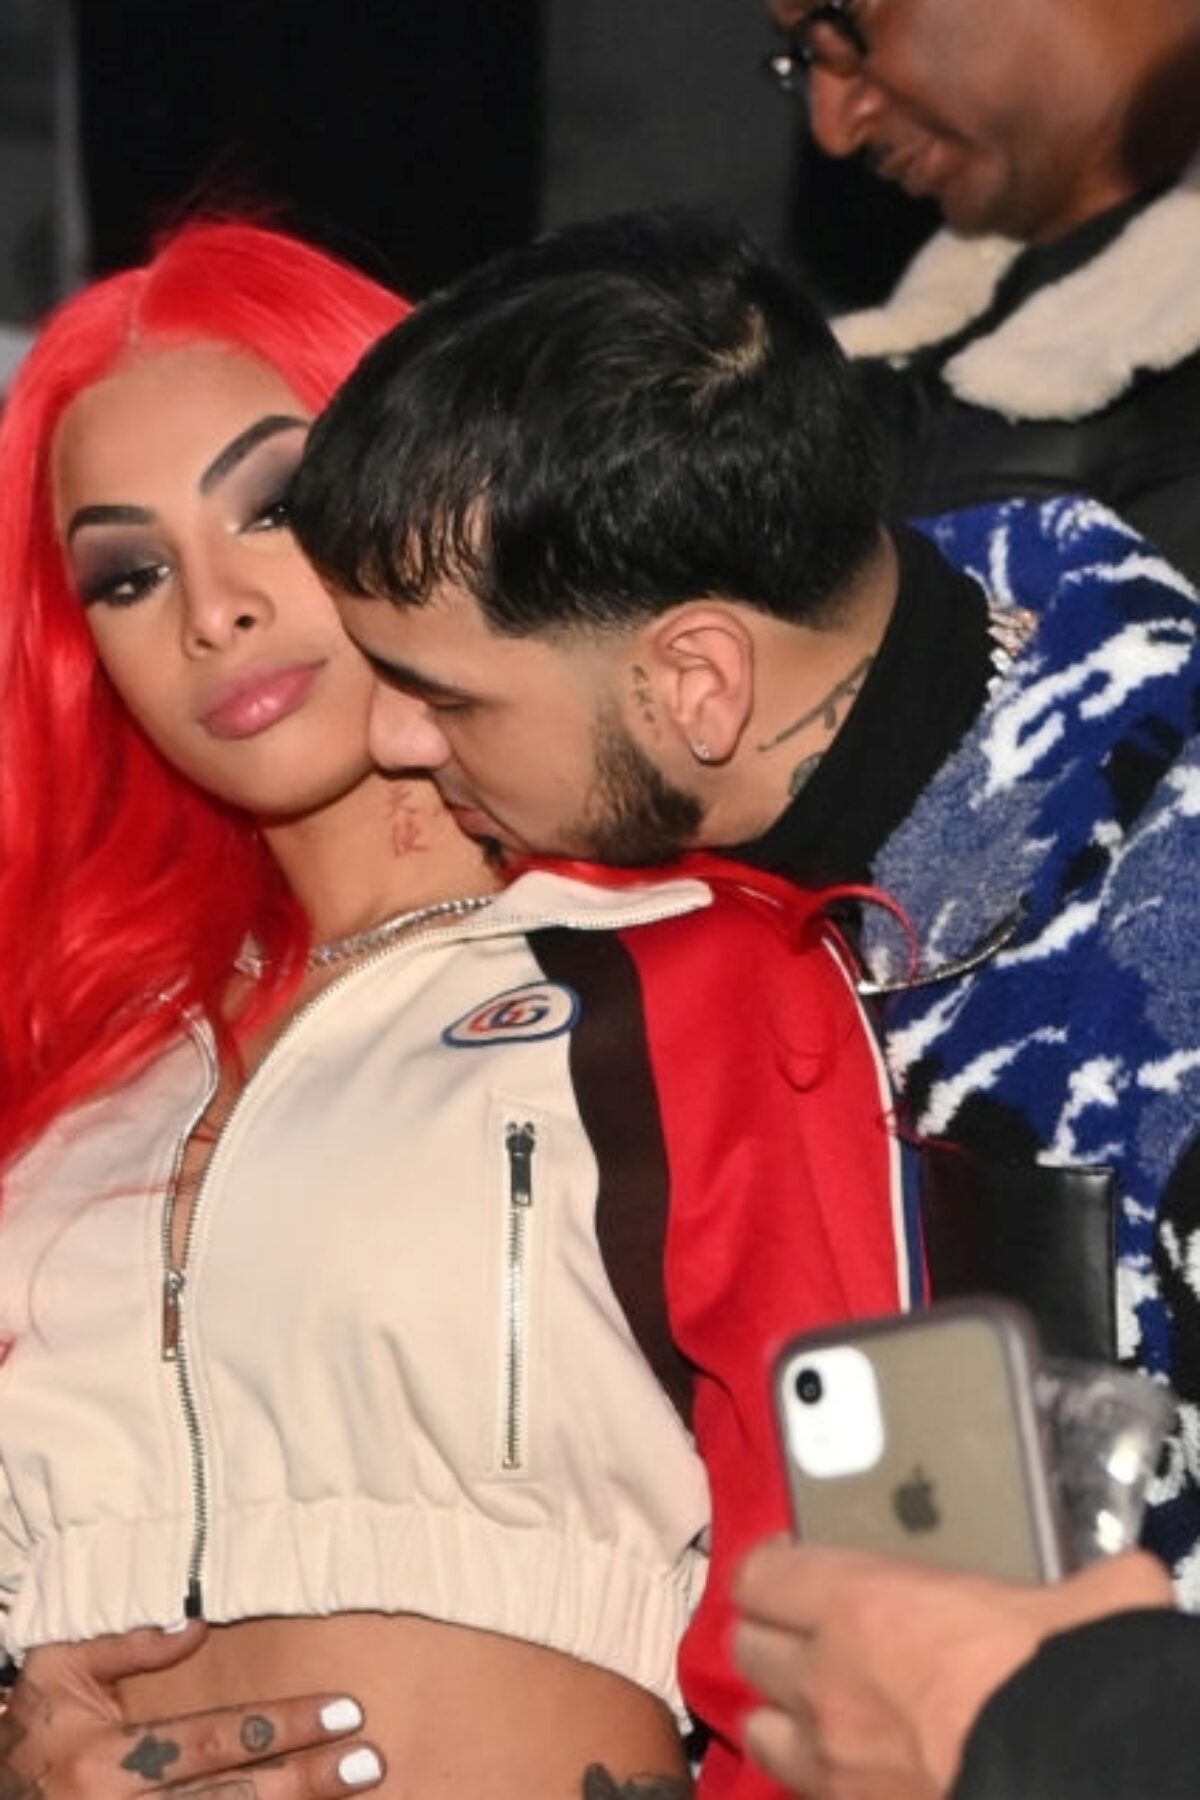 CLEVELAND, OH - FEBRUARY 20: Anuel AA and Yailin la Mas Viral attend All Star WKND Finale at Galleria at Erieview on February 20, 2022 in Cleveland, Ohio.(Photo by Prince Williams/Wireimage)